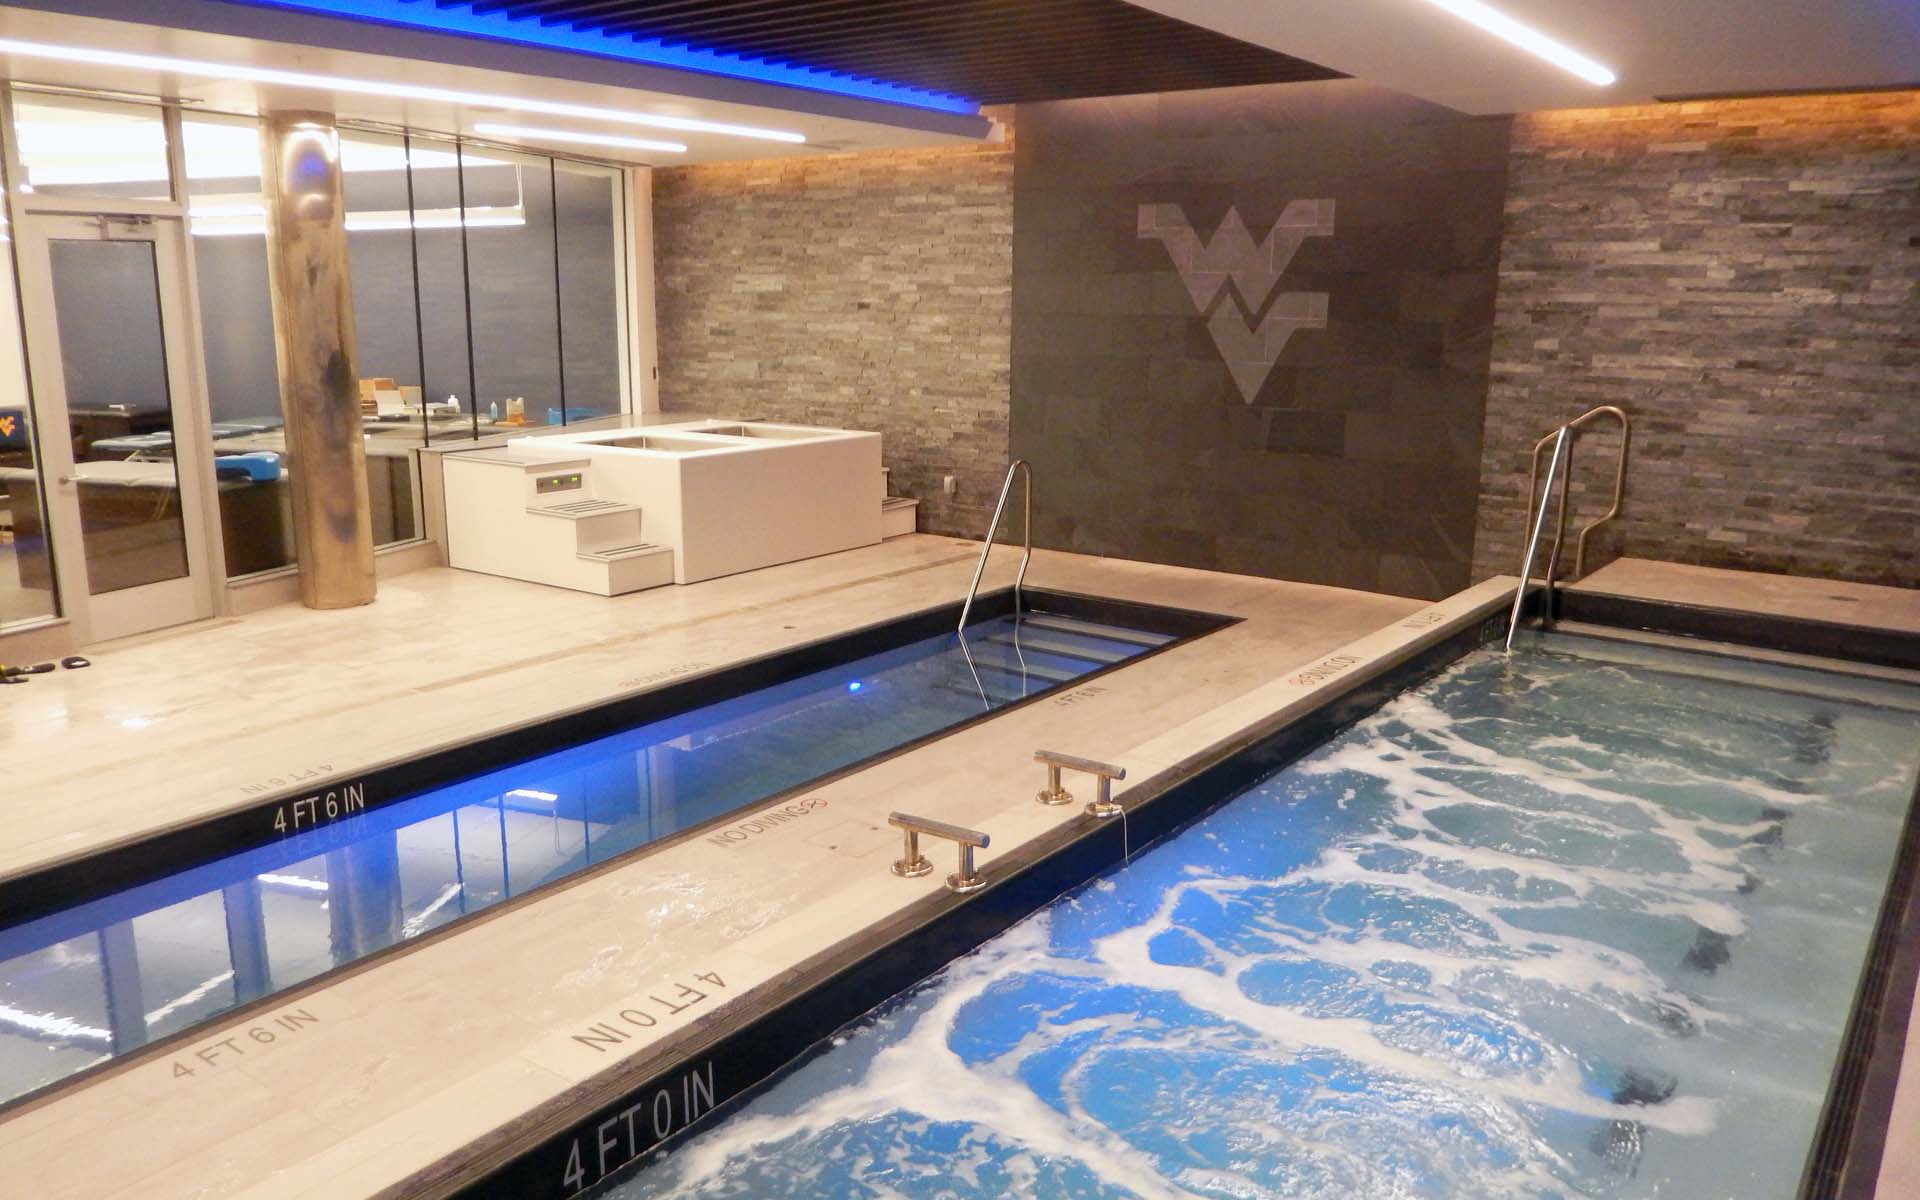 WVU Hydrotherapy Room Grimm Scientific hydrotherapy system